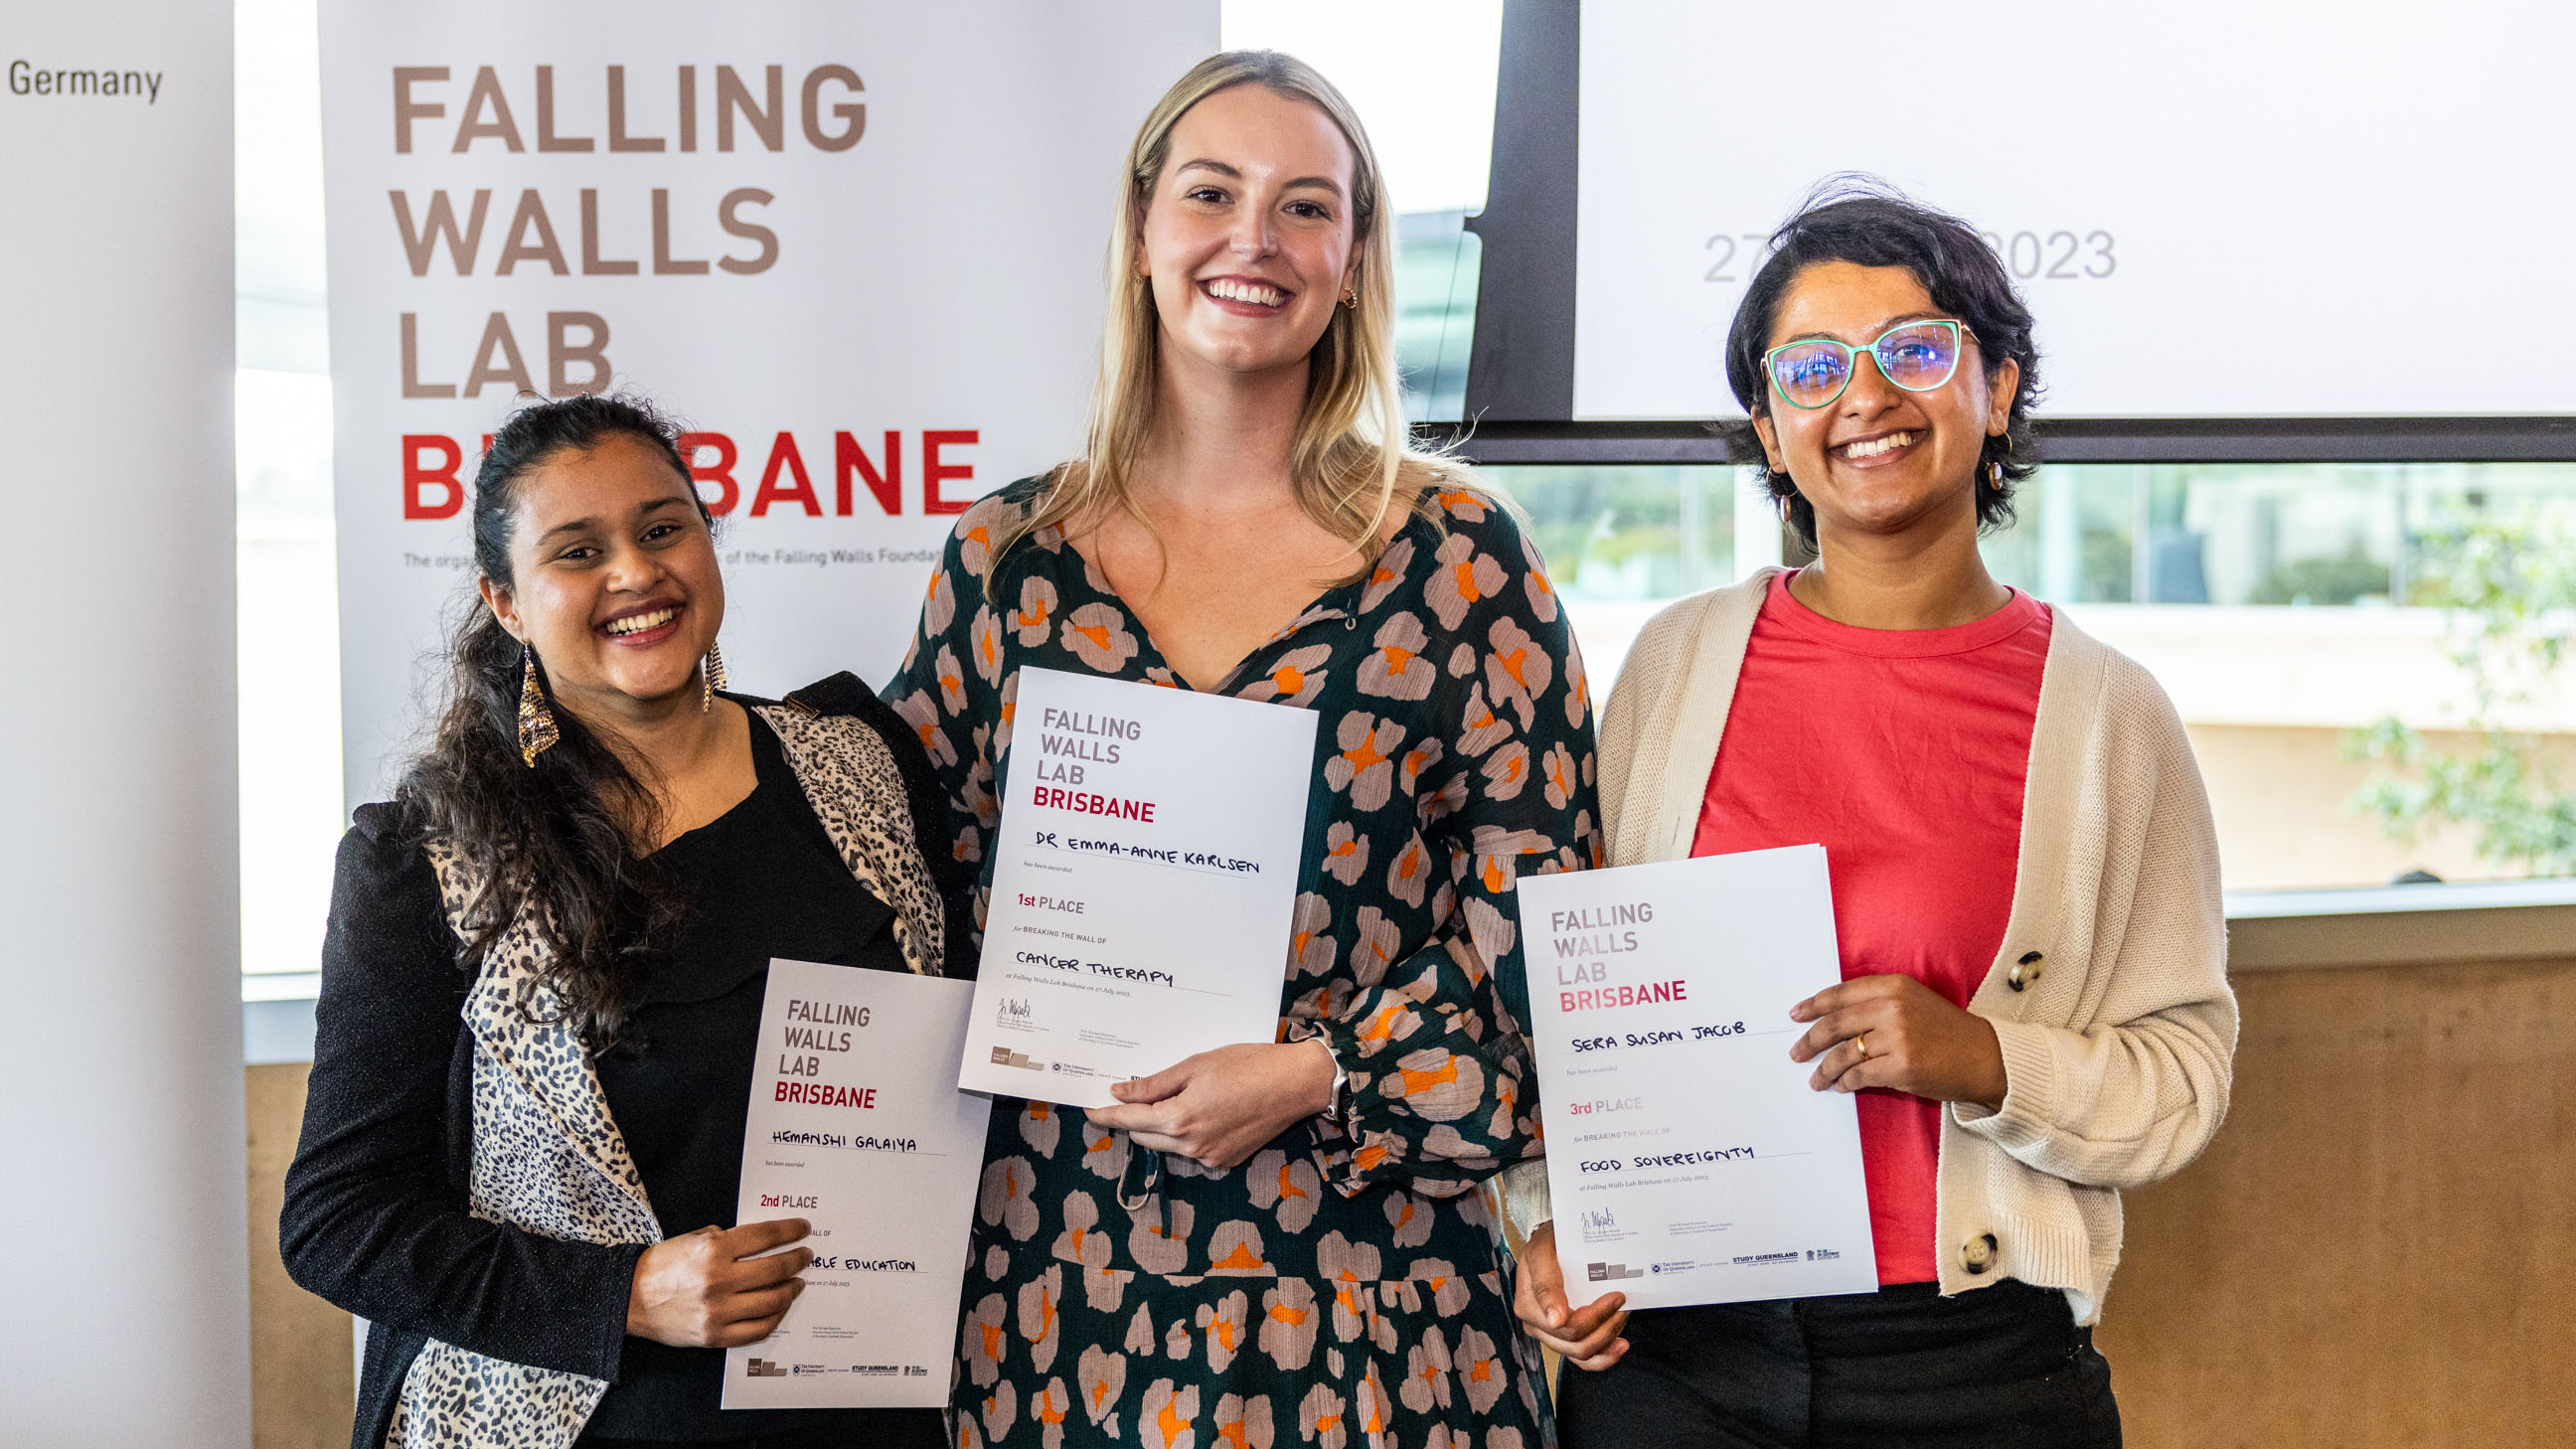 Falling Walls Lab Brisbane winners standing together and holding certificates